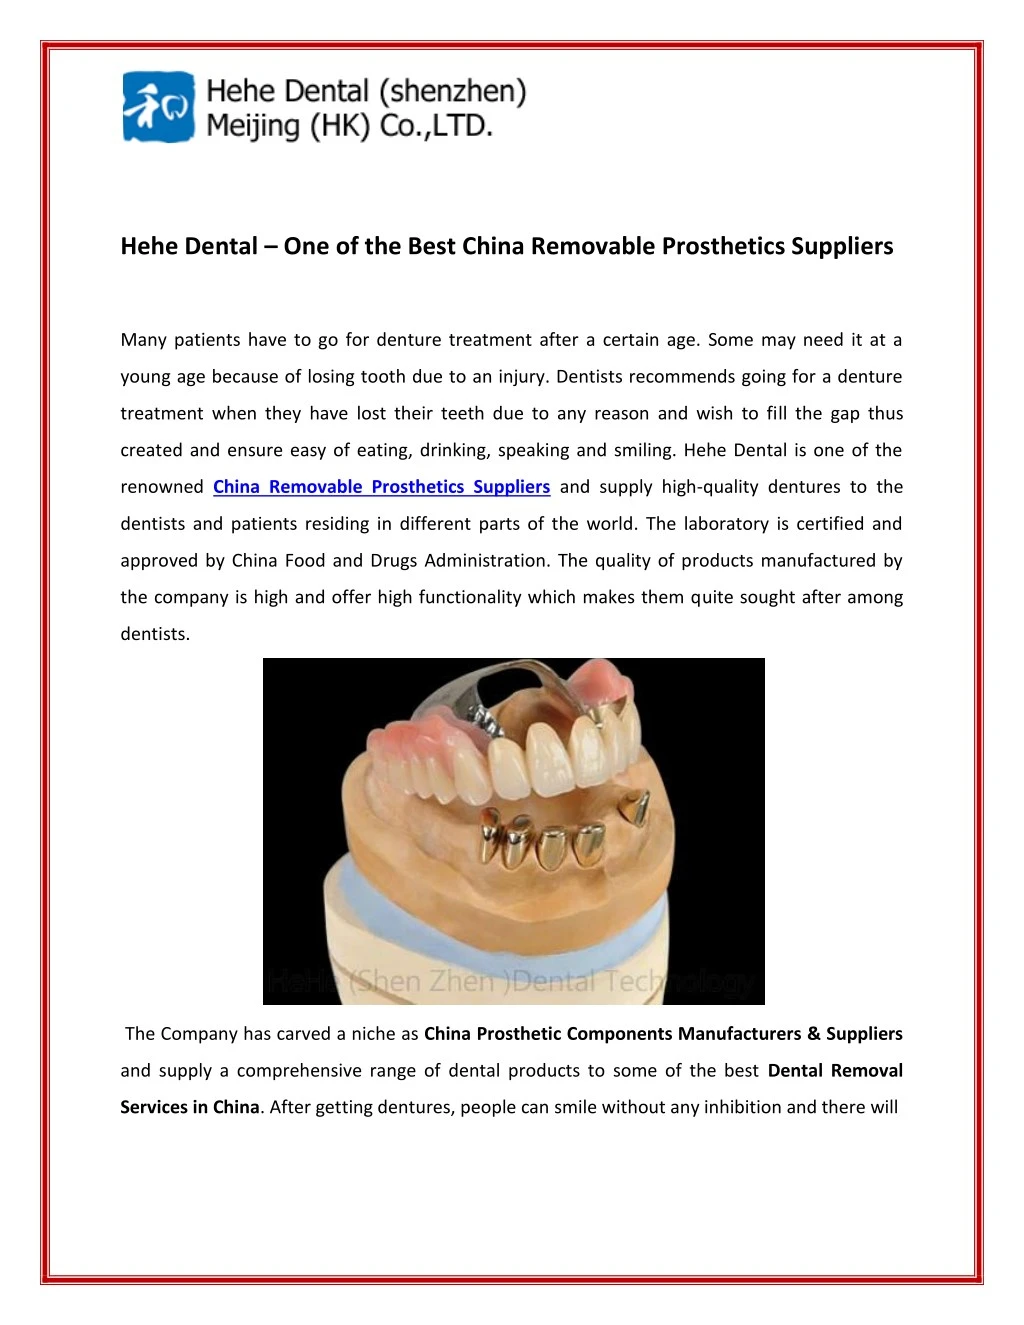 hehe dental one of the best china removable